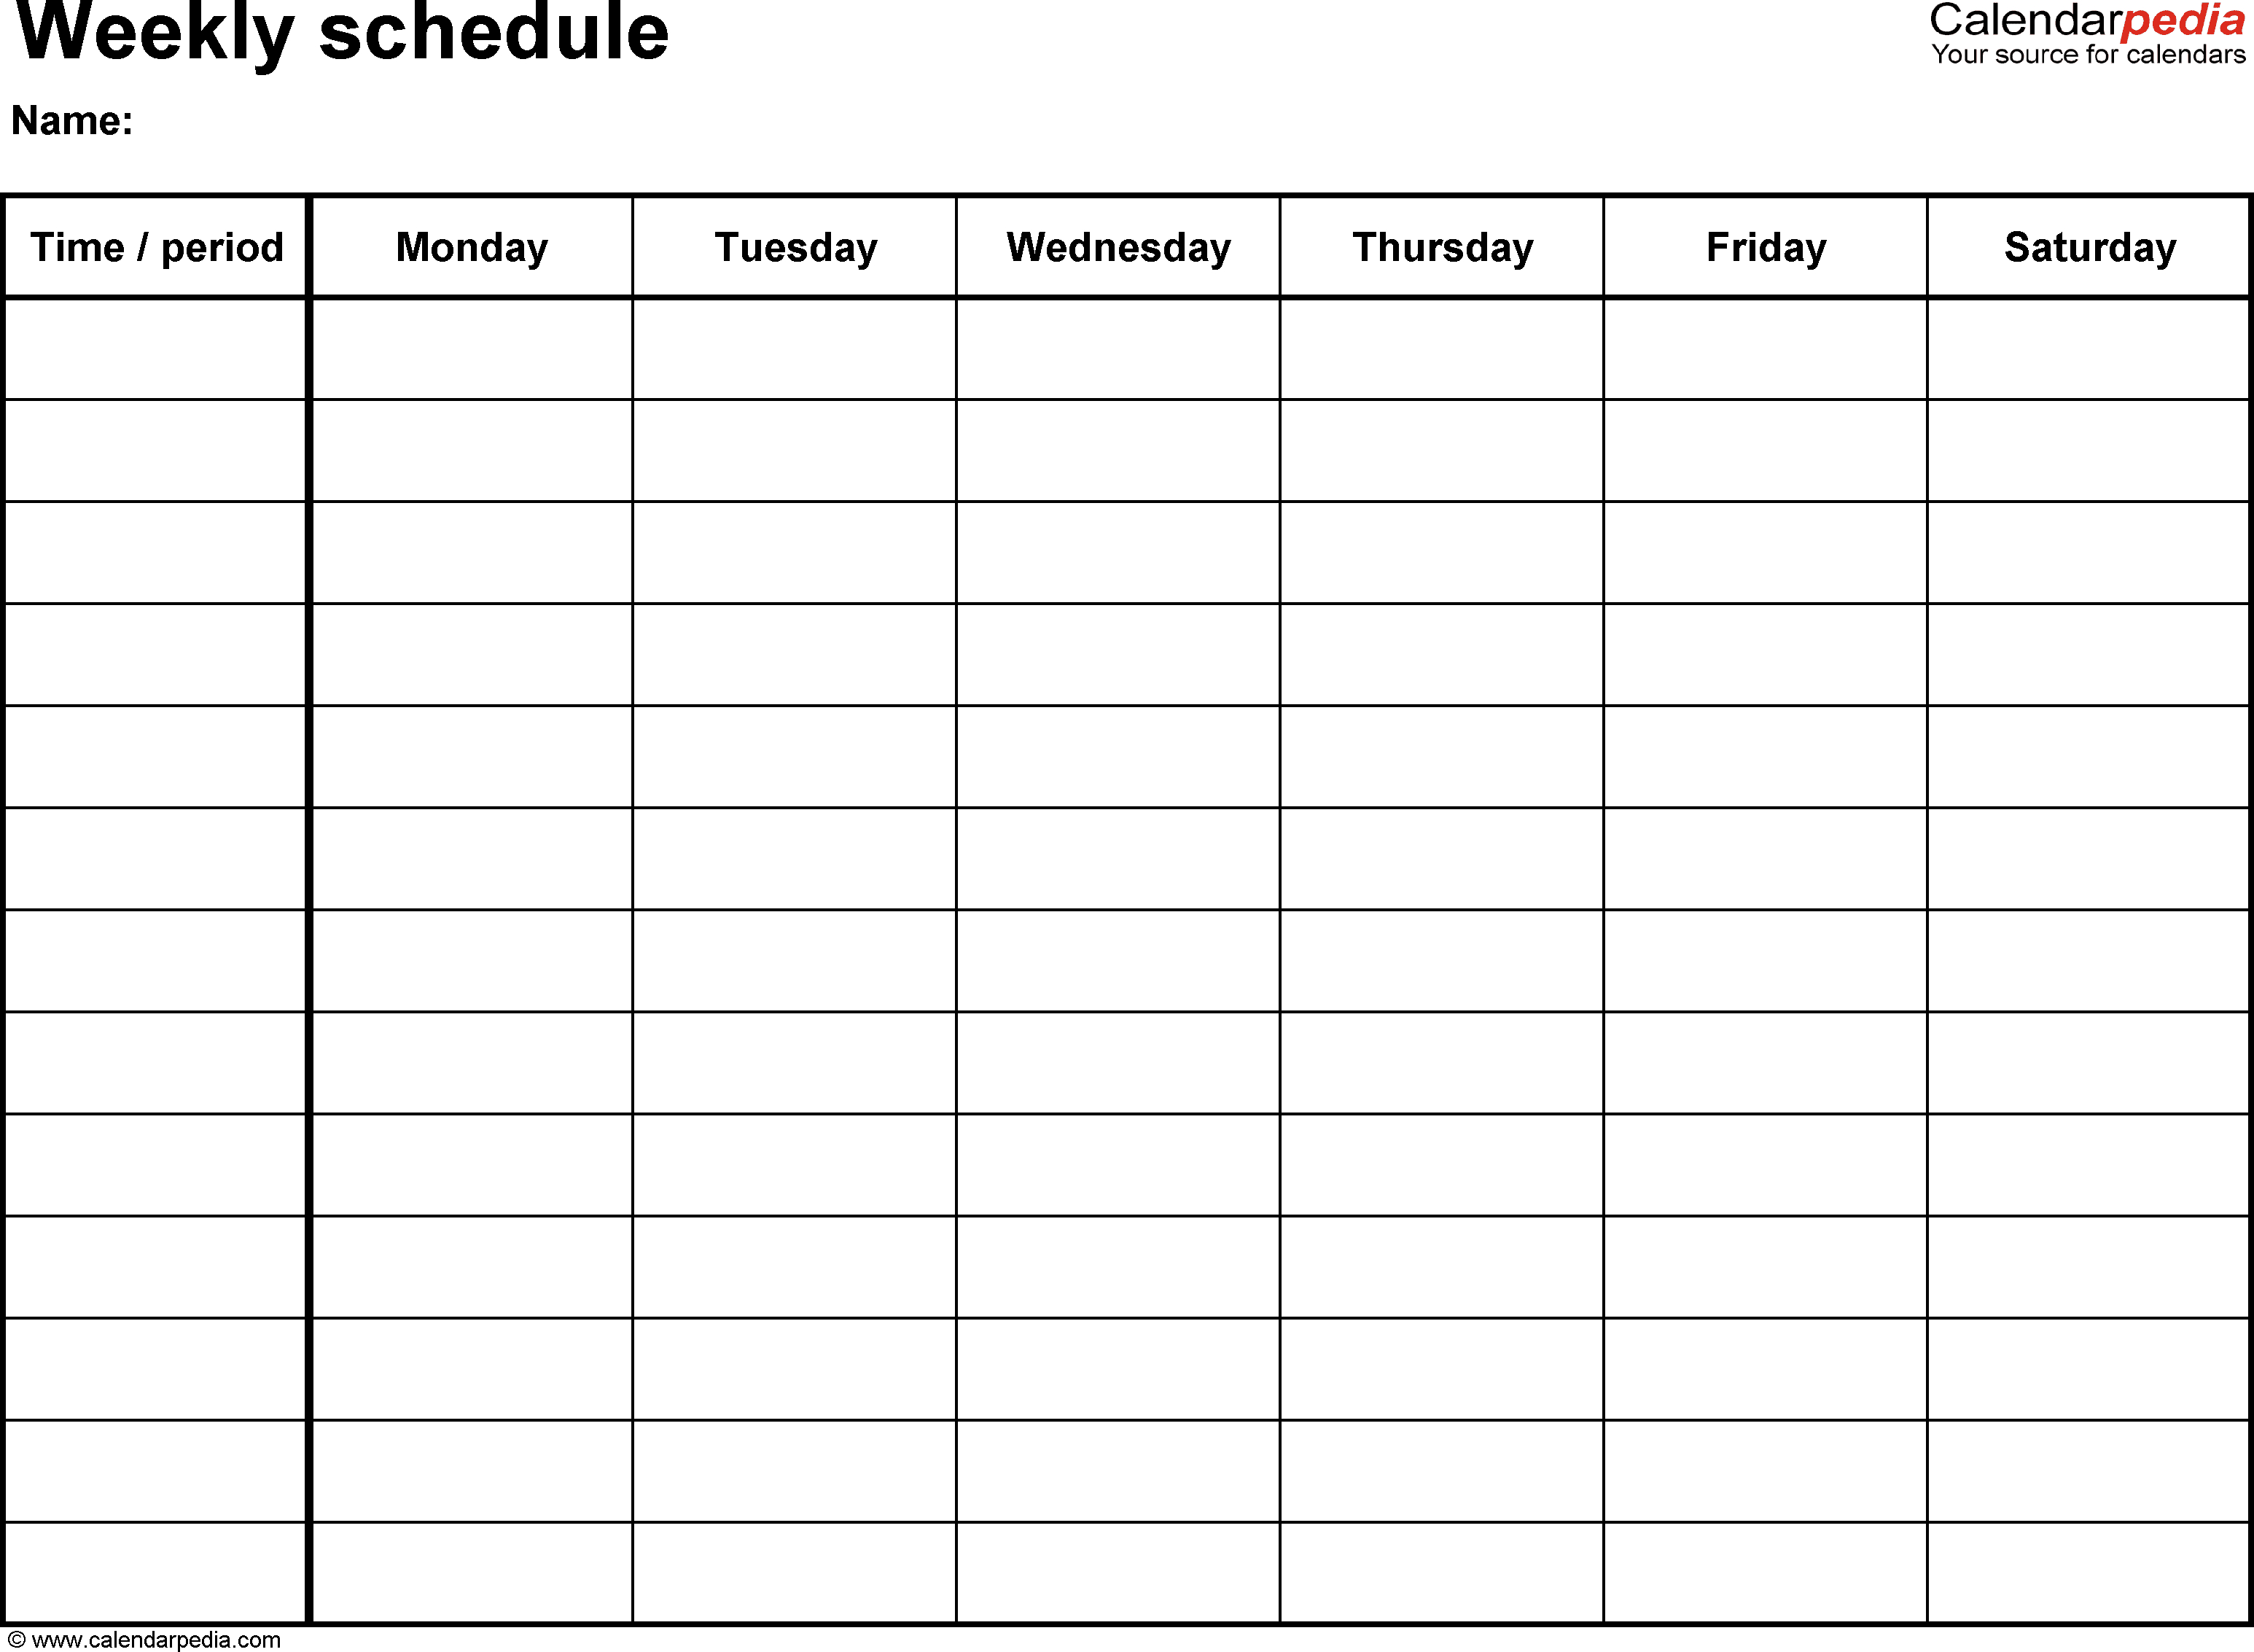 Week Schedule Templates  Bolan.horizonconsulting.co pertaining to Weekly Calendar Template With Times